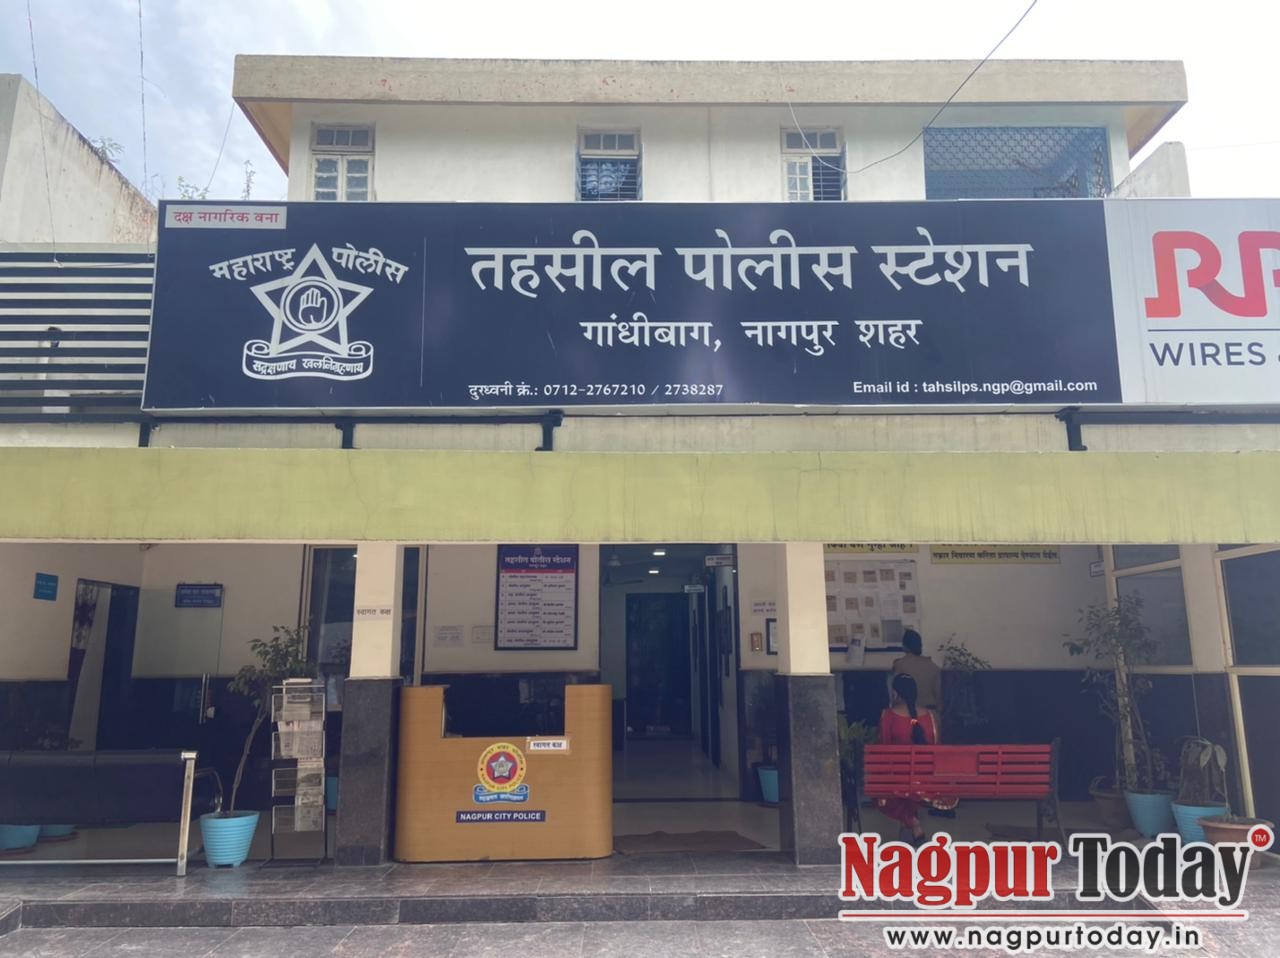 Maharajbagh throws up ‘romantic creatures’ for amusing visitors! - Nagpur